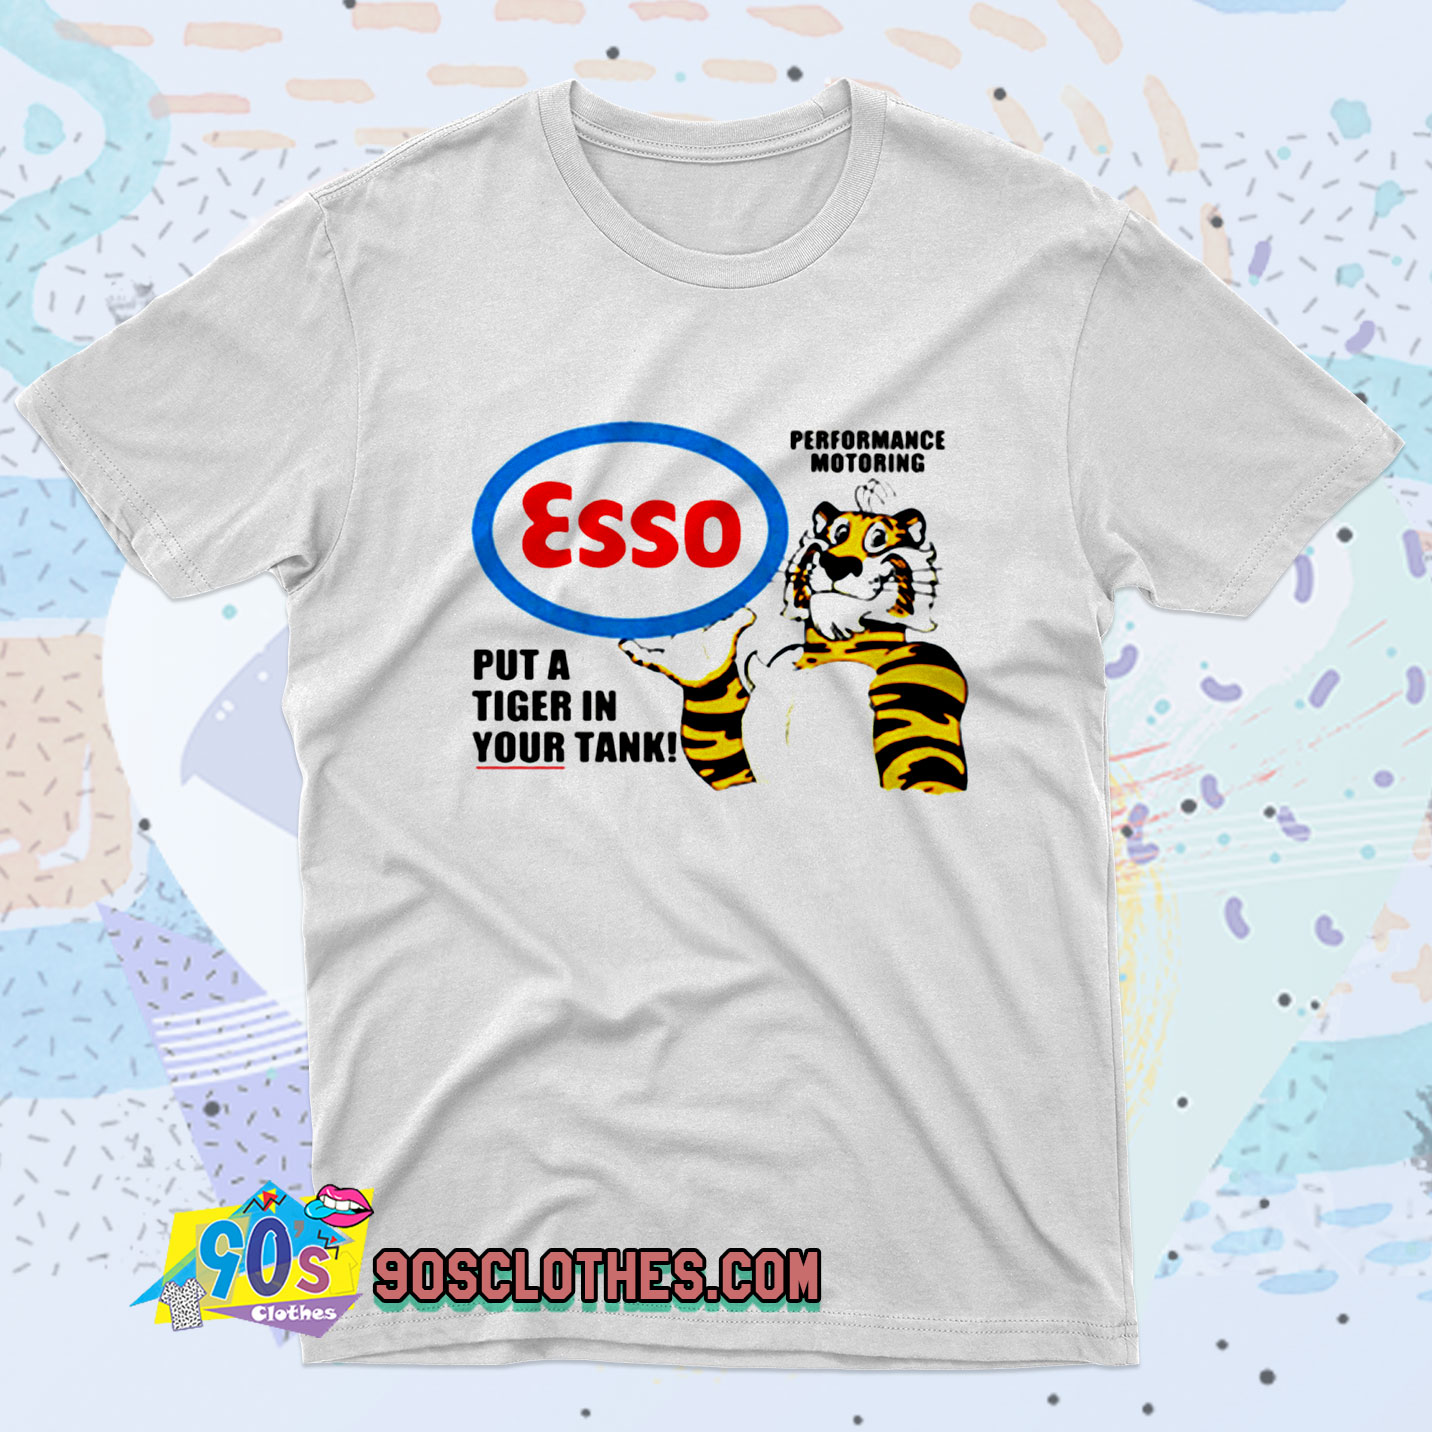 Esso Put A In Tank Fashionable shirt - 90sclothes.com